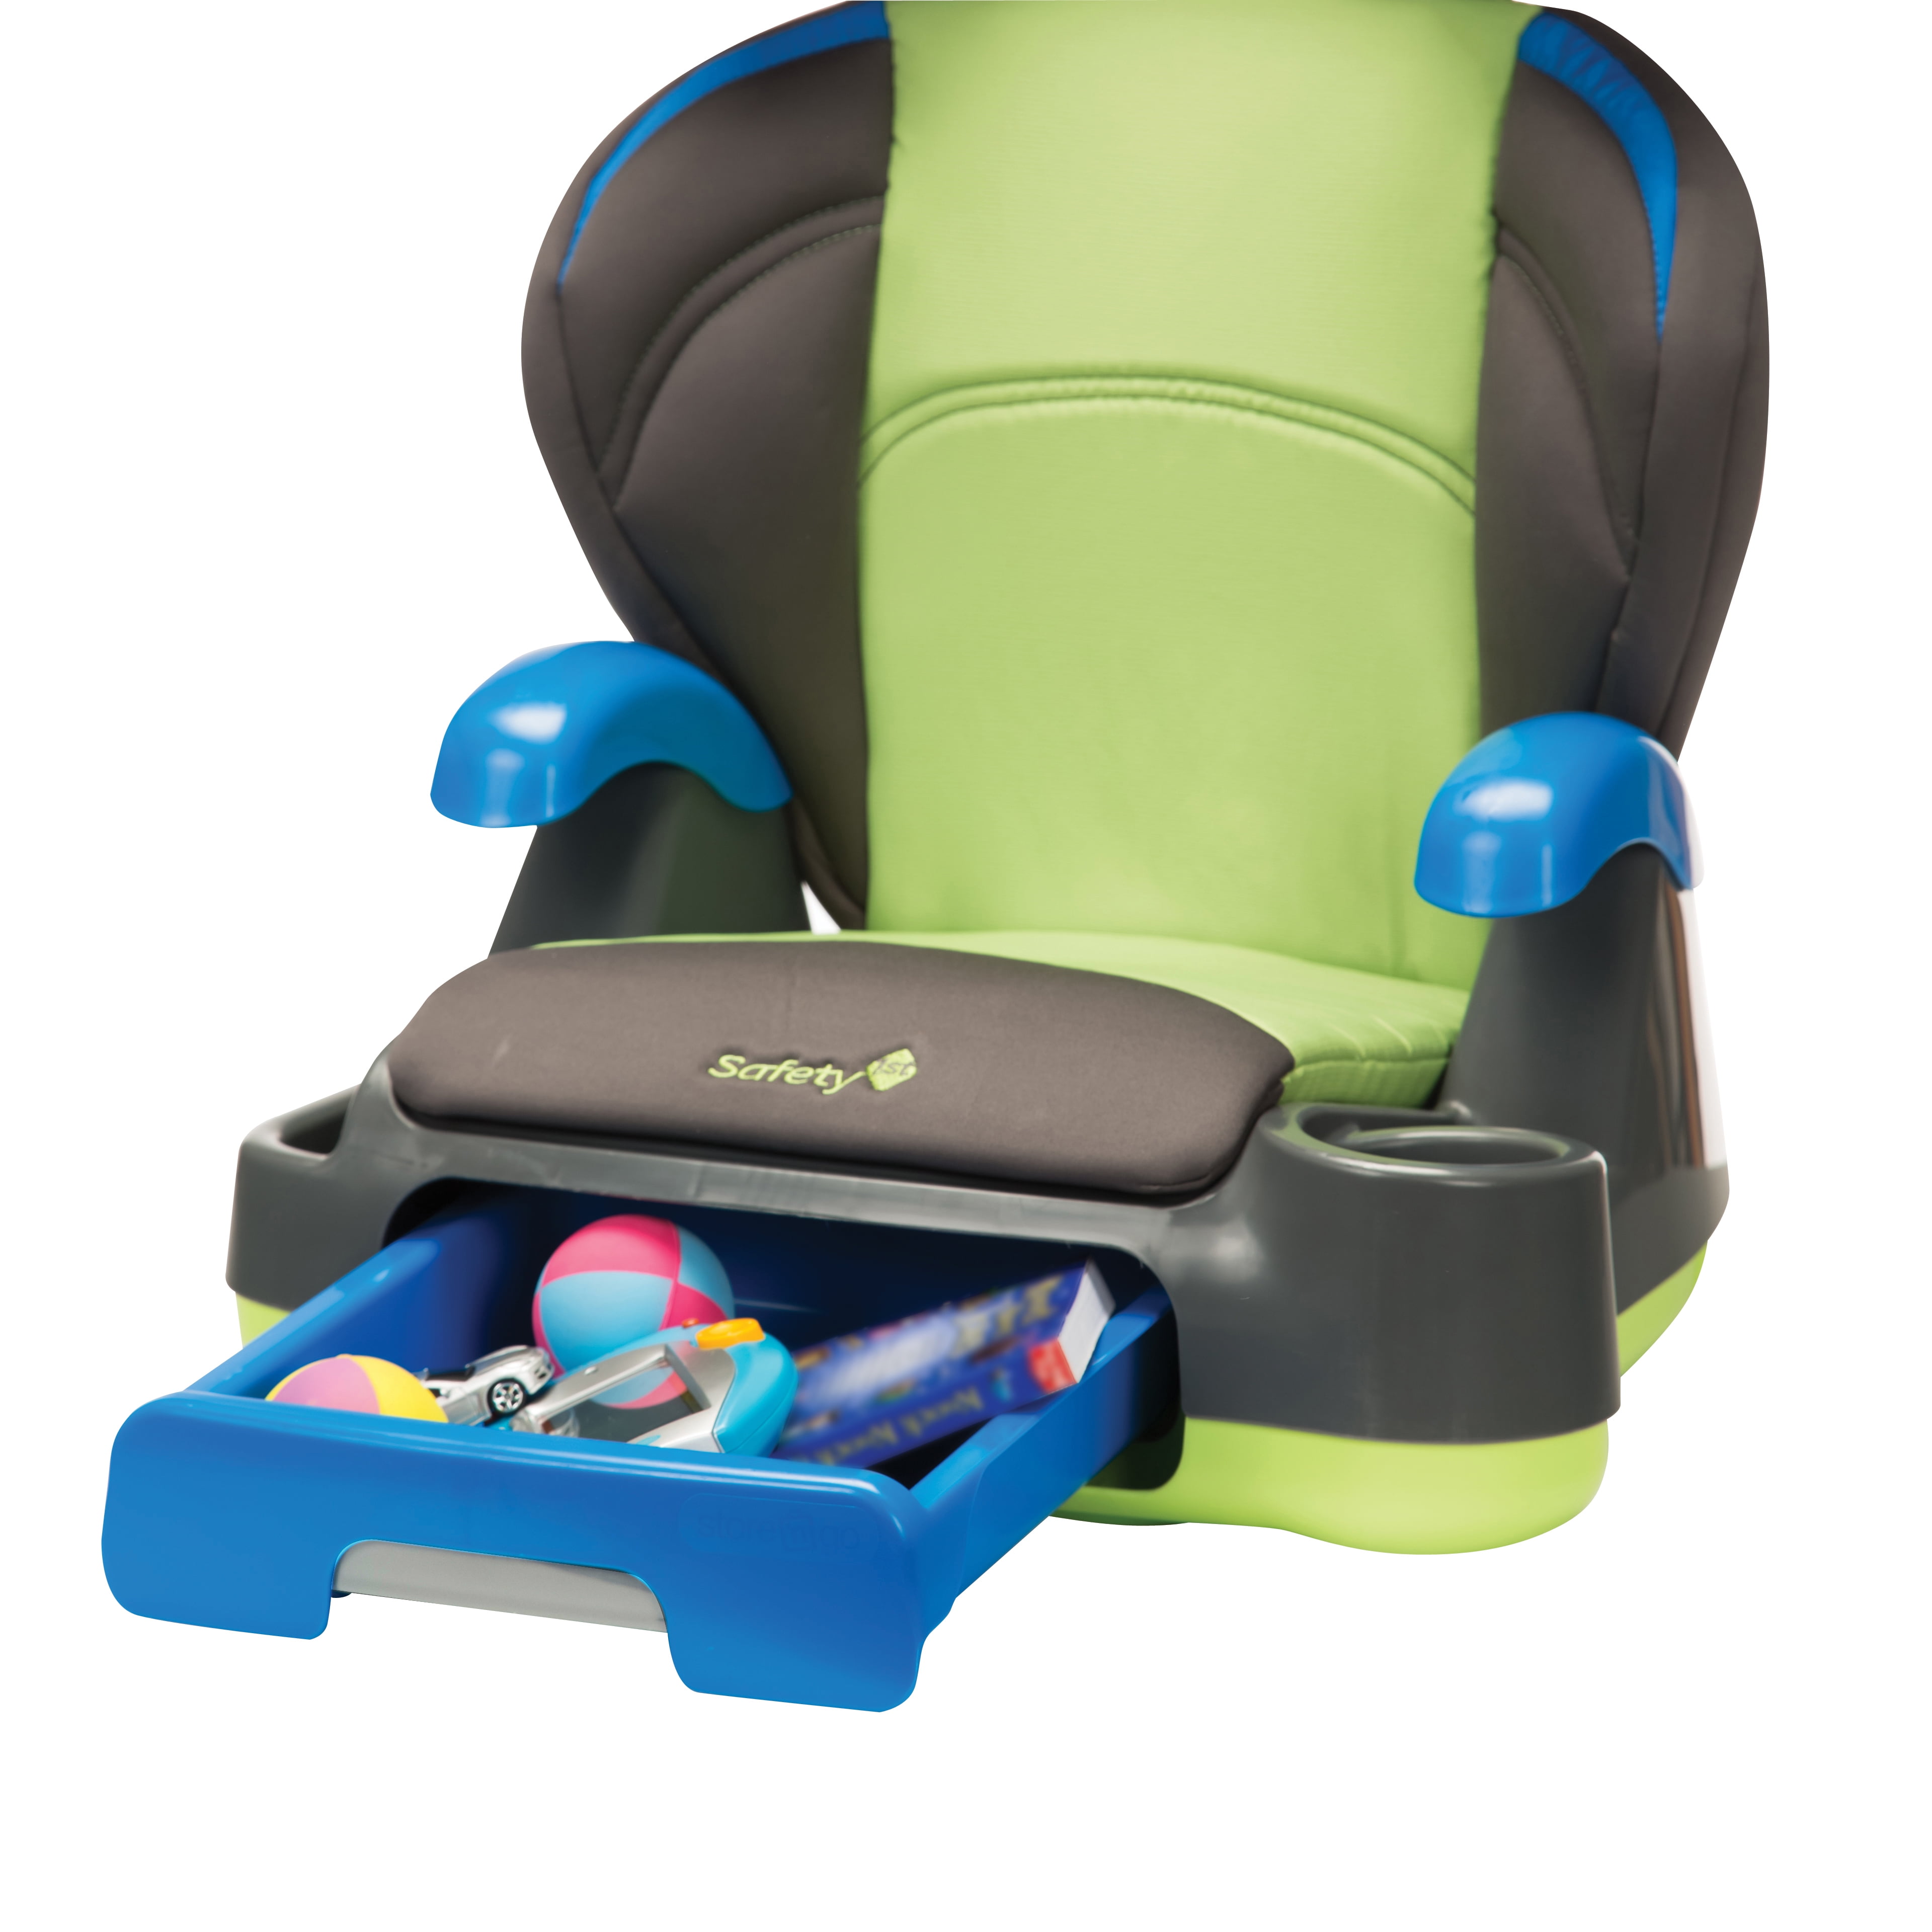 Stone Dust Safety 1st Store n Go Belt-Positioning Booster Car Seat 